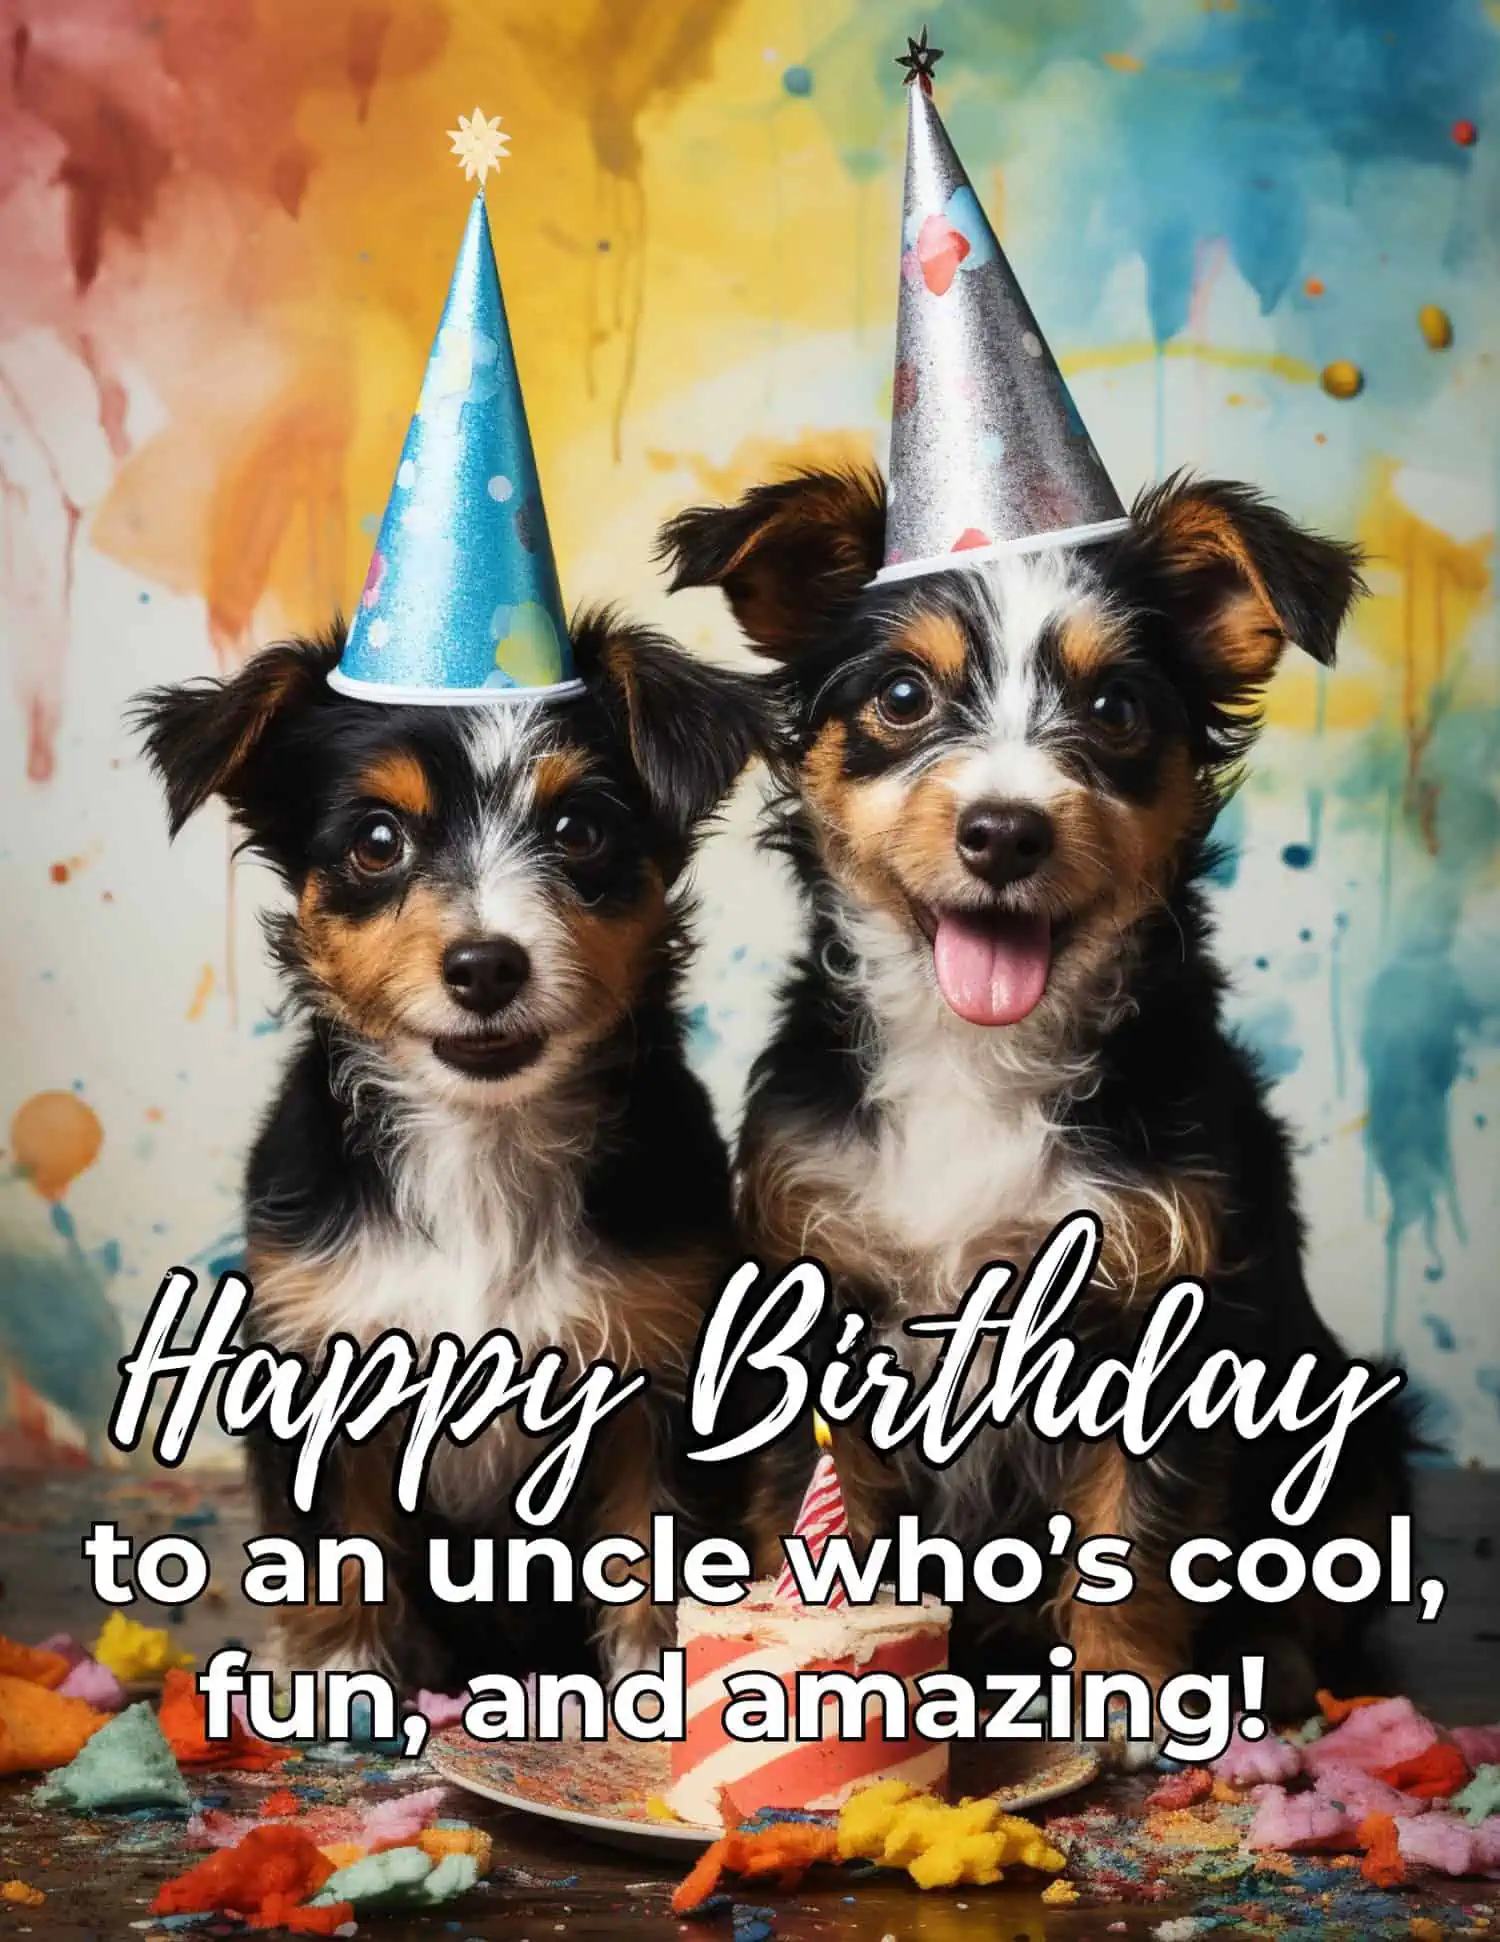 A collection of heartfelt and straightforward birthday wishes designed to celebrate and honor the unique bond shared with an uncle.